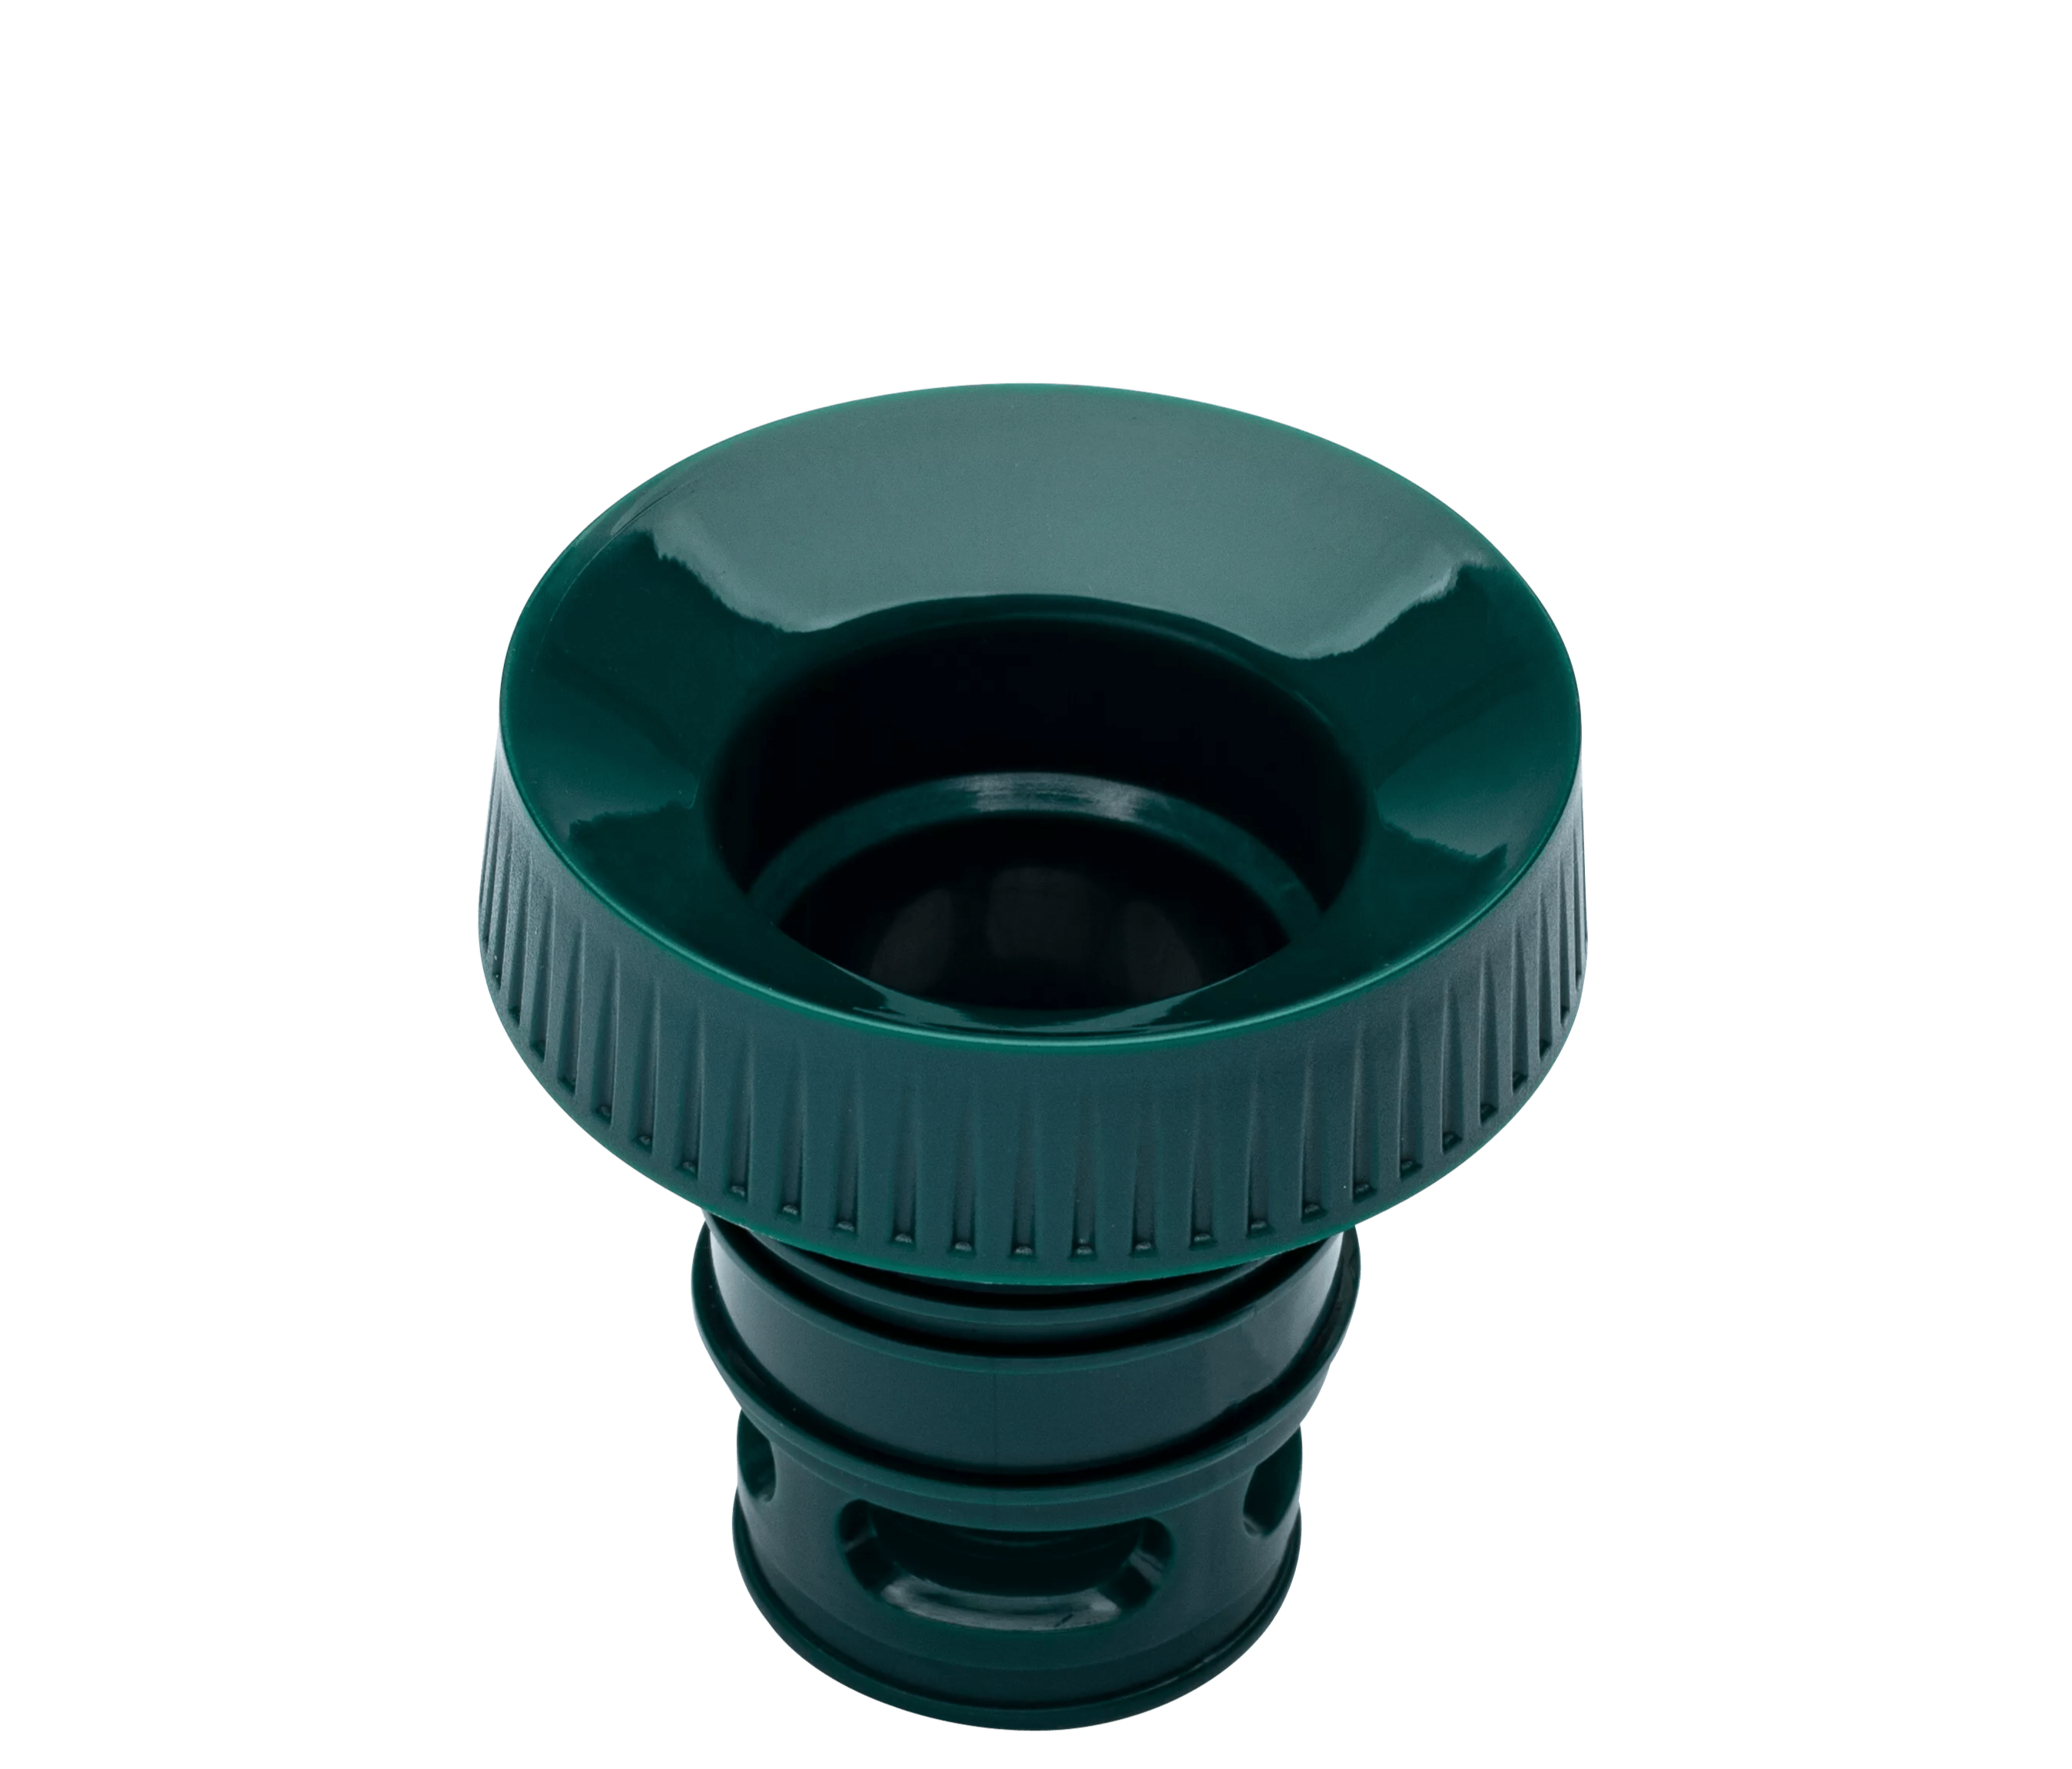 Parts Shop Replacement Thermos Stopper for Stanley Classic Vacuum